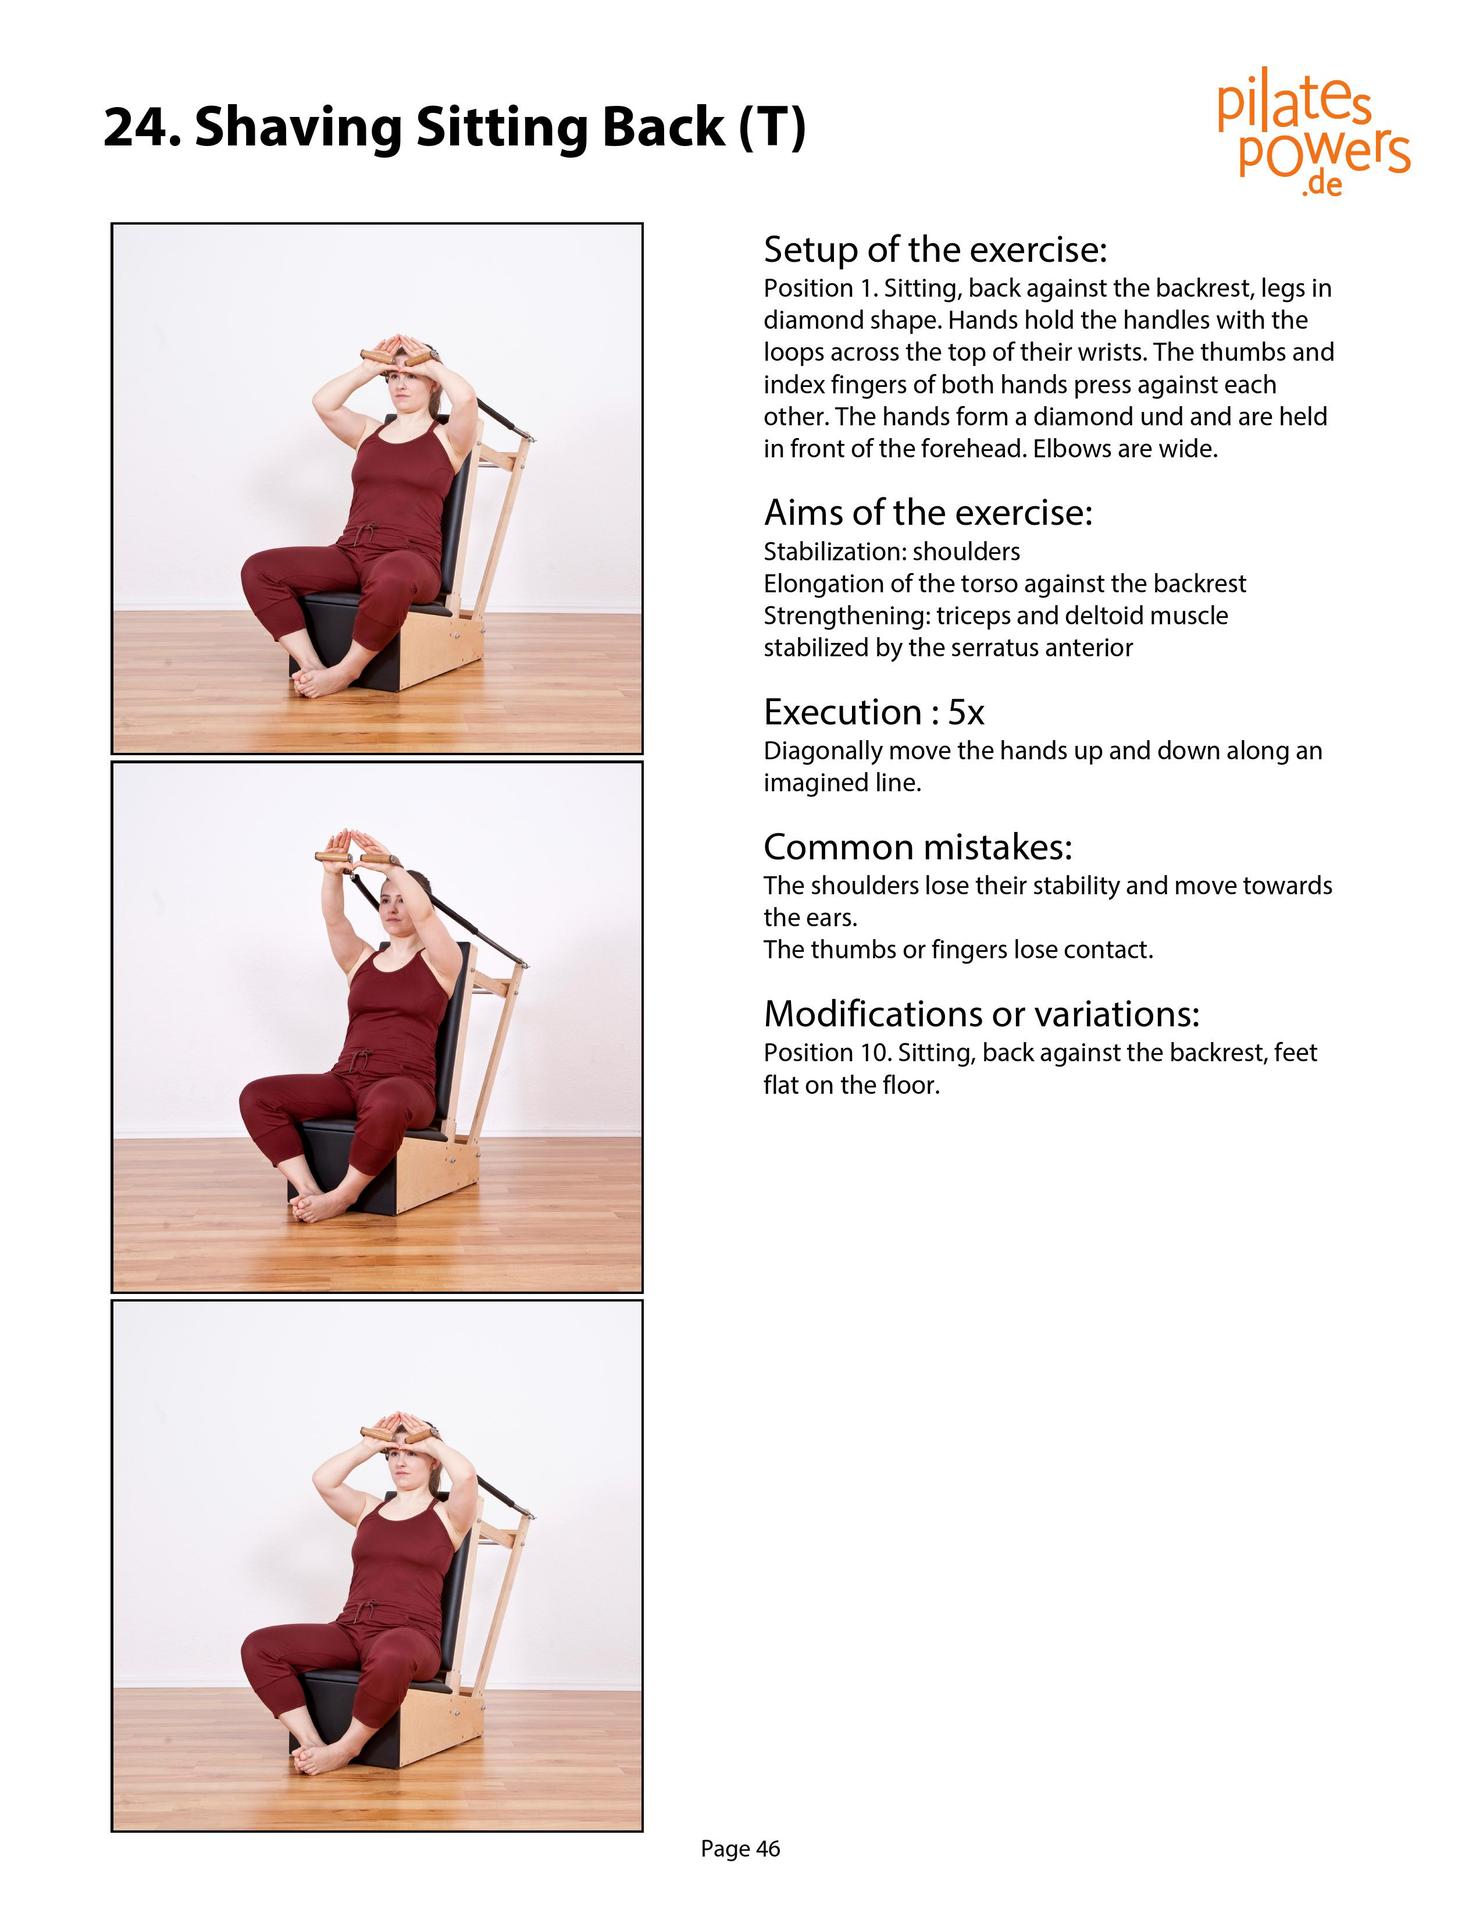 The Pilates Arm Chair The 42 most effective exercises - photo 46